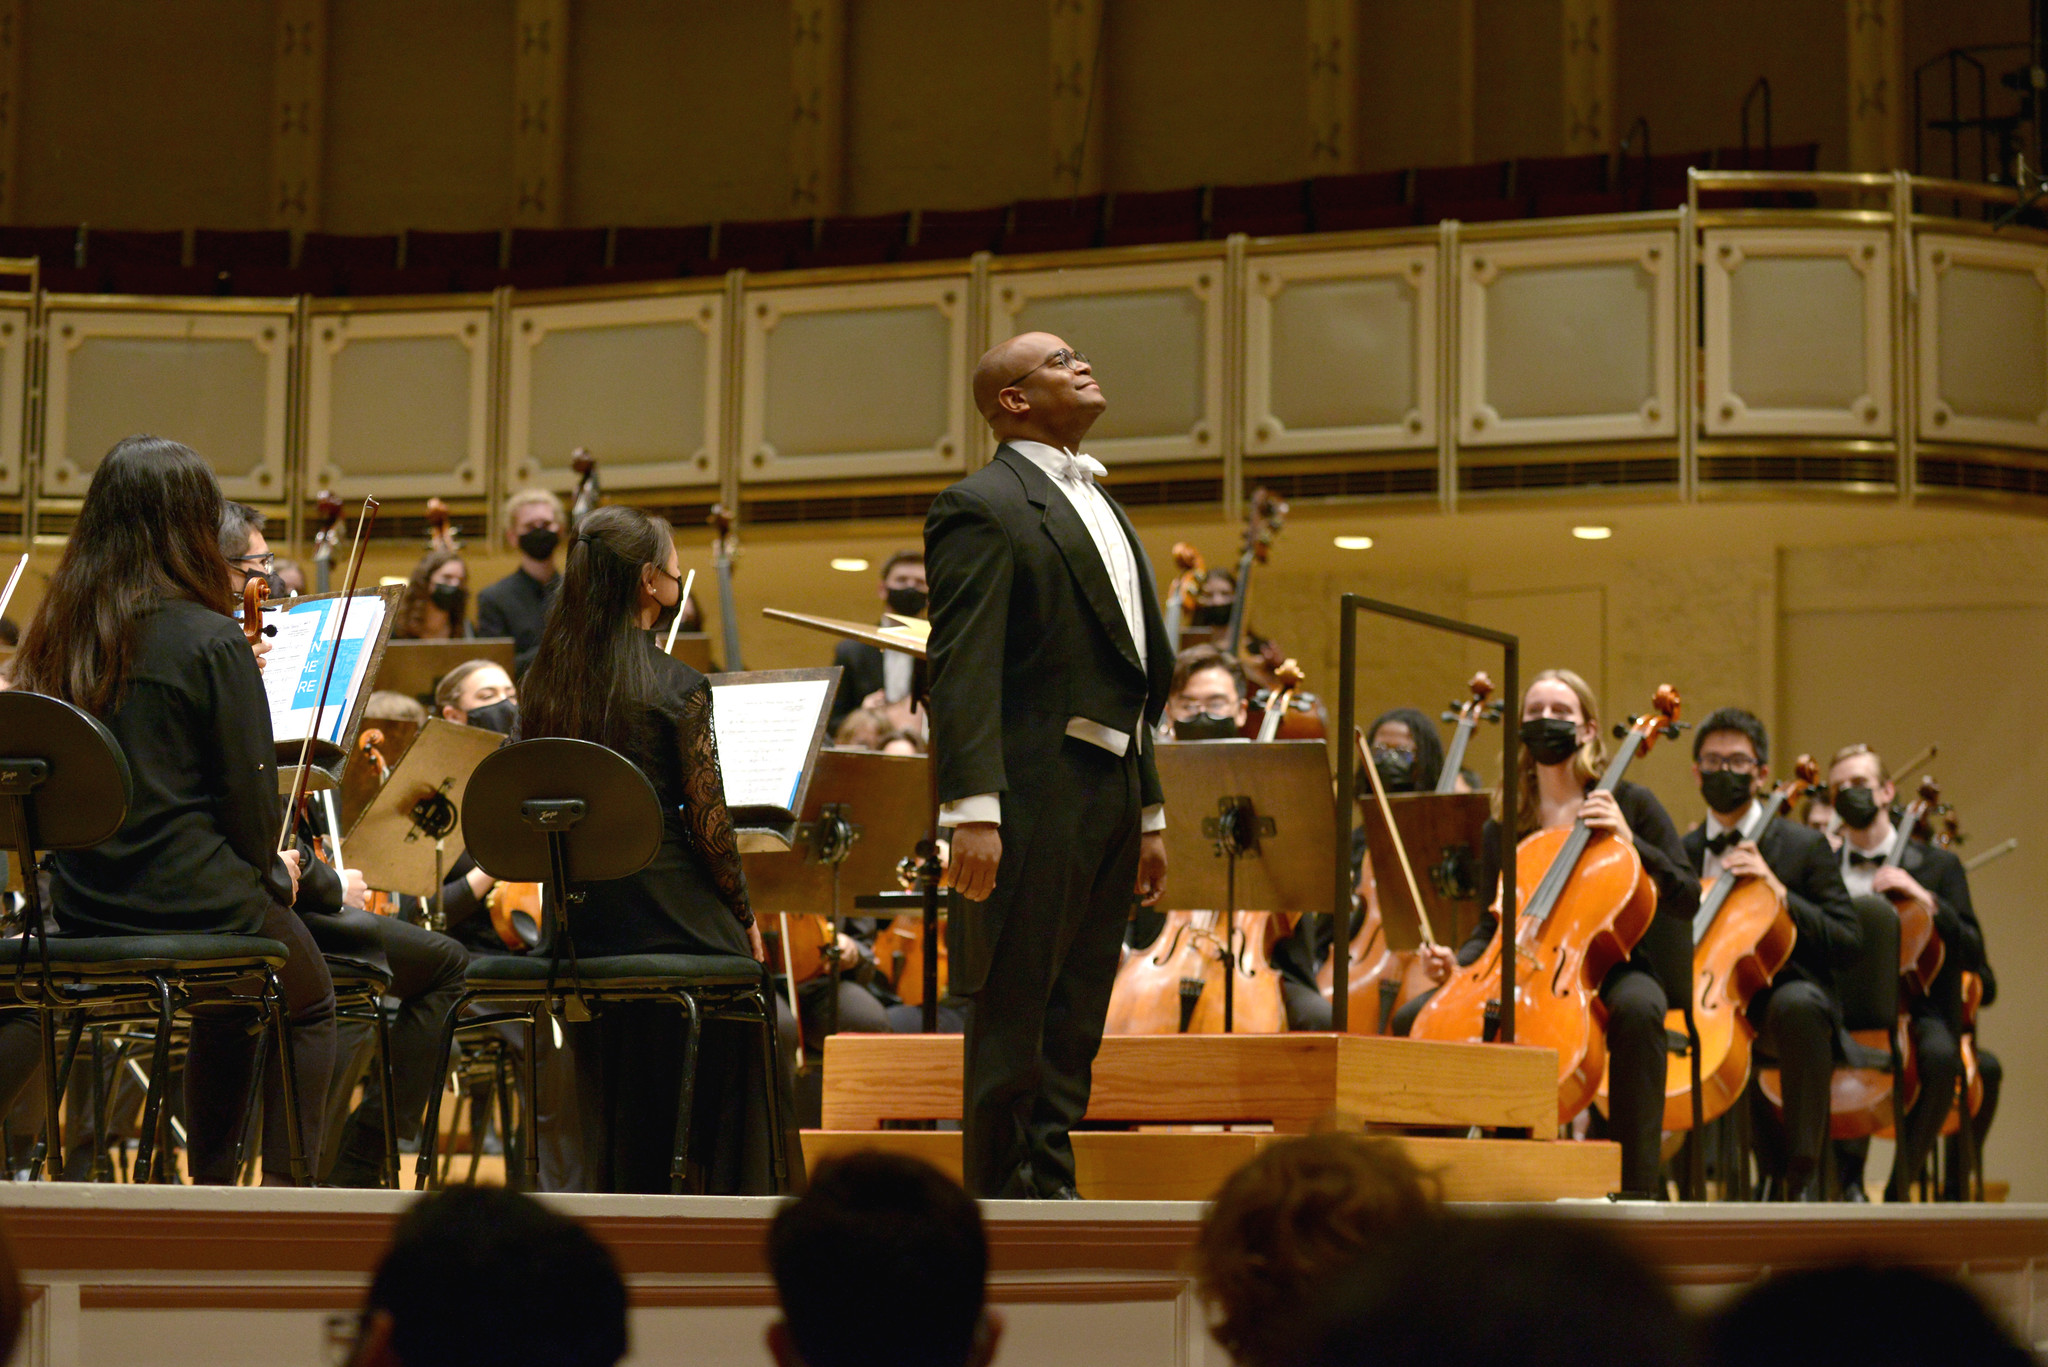 CYSO Symphony Orchestra at Orchestra Hall, Fall 2021